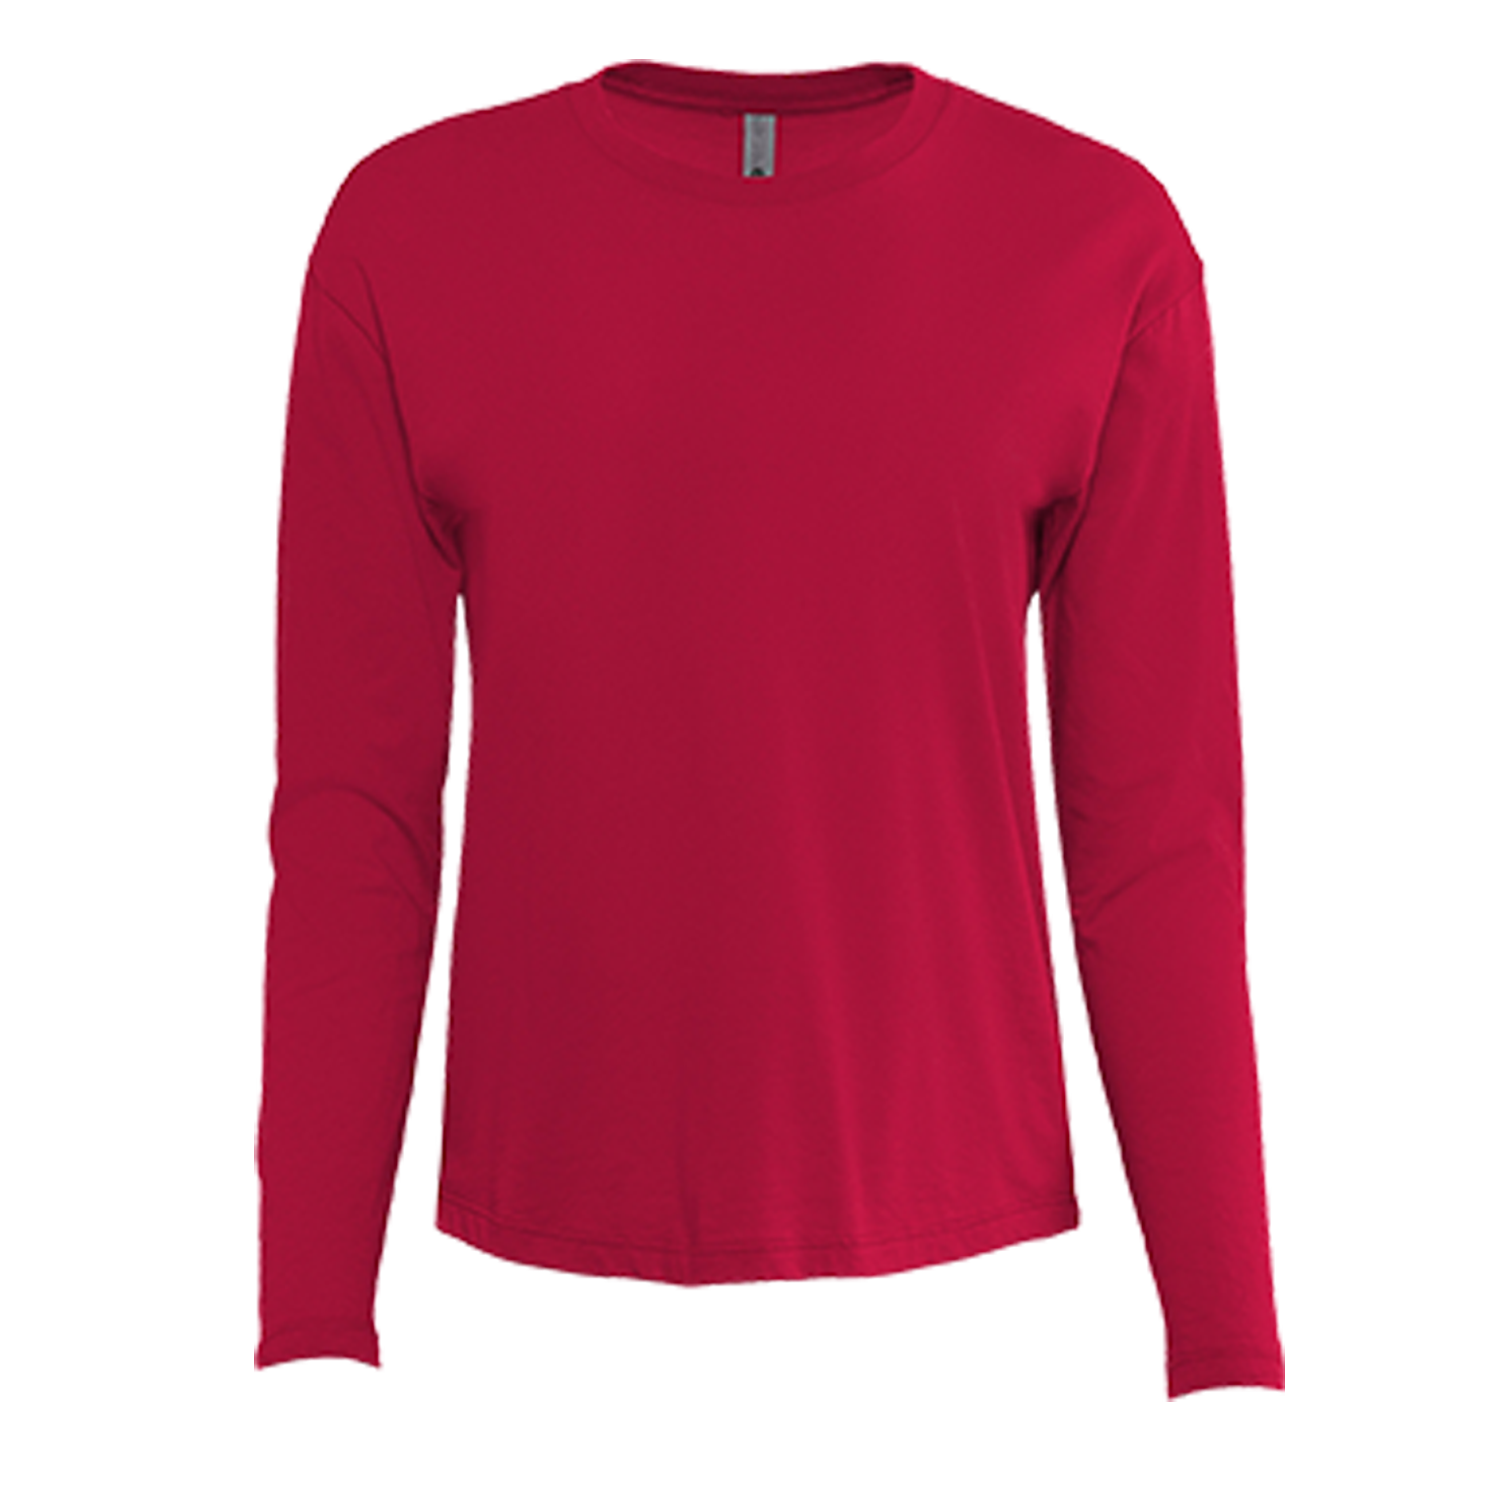 Next Level Apparel 3911NL Ladies' Relaxed Long Sleeve T-Shirt